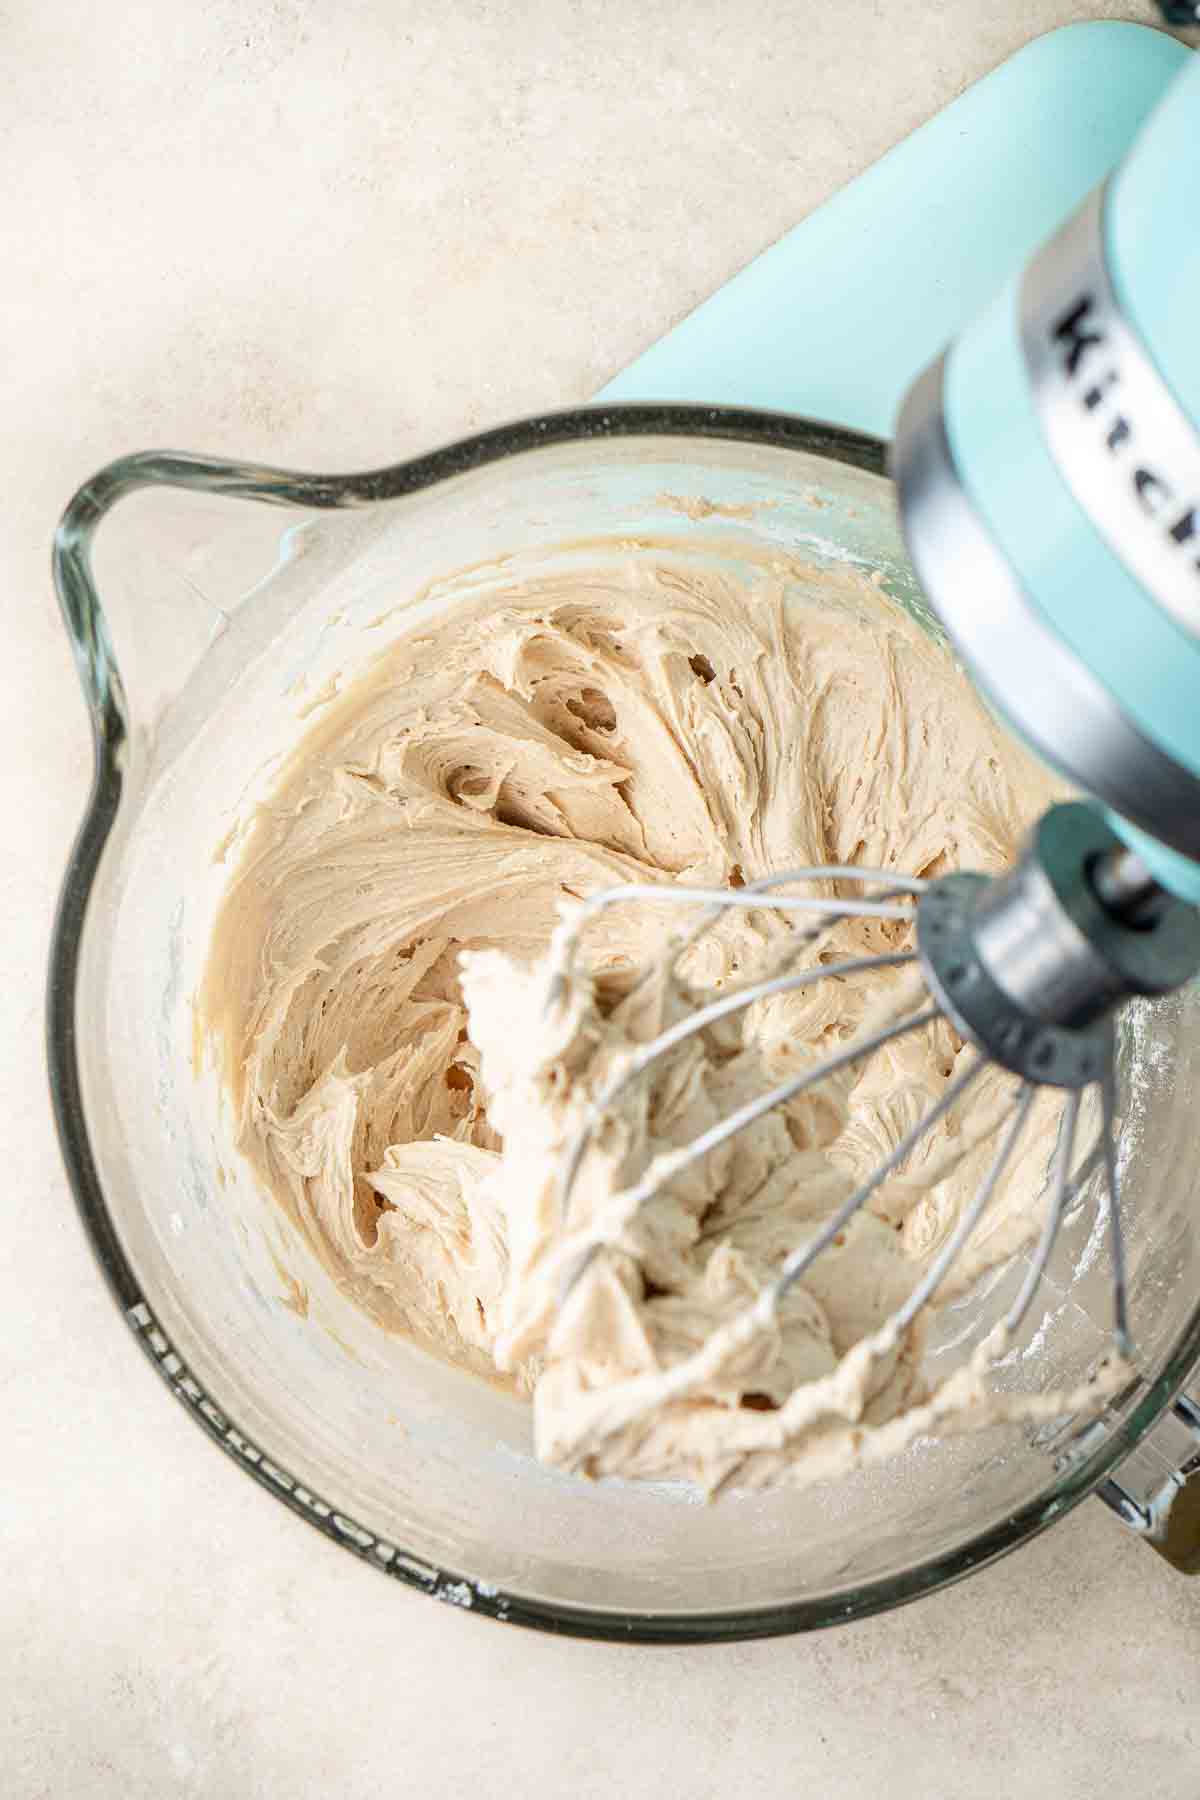 The biscoff buttercream in the stand mixer bowl.